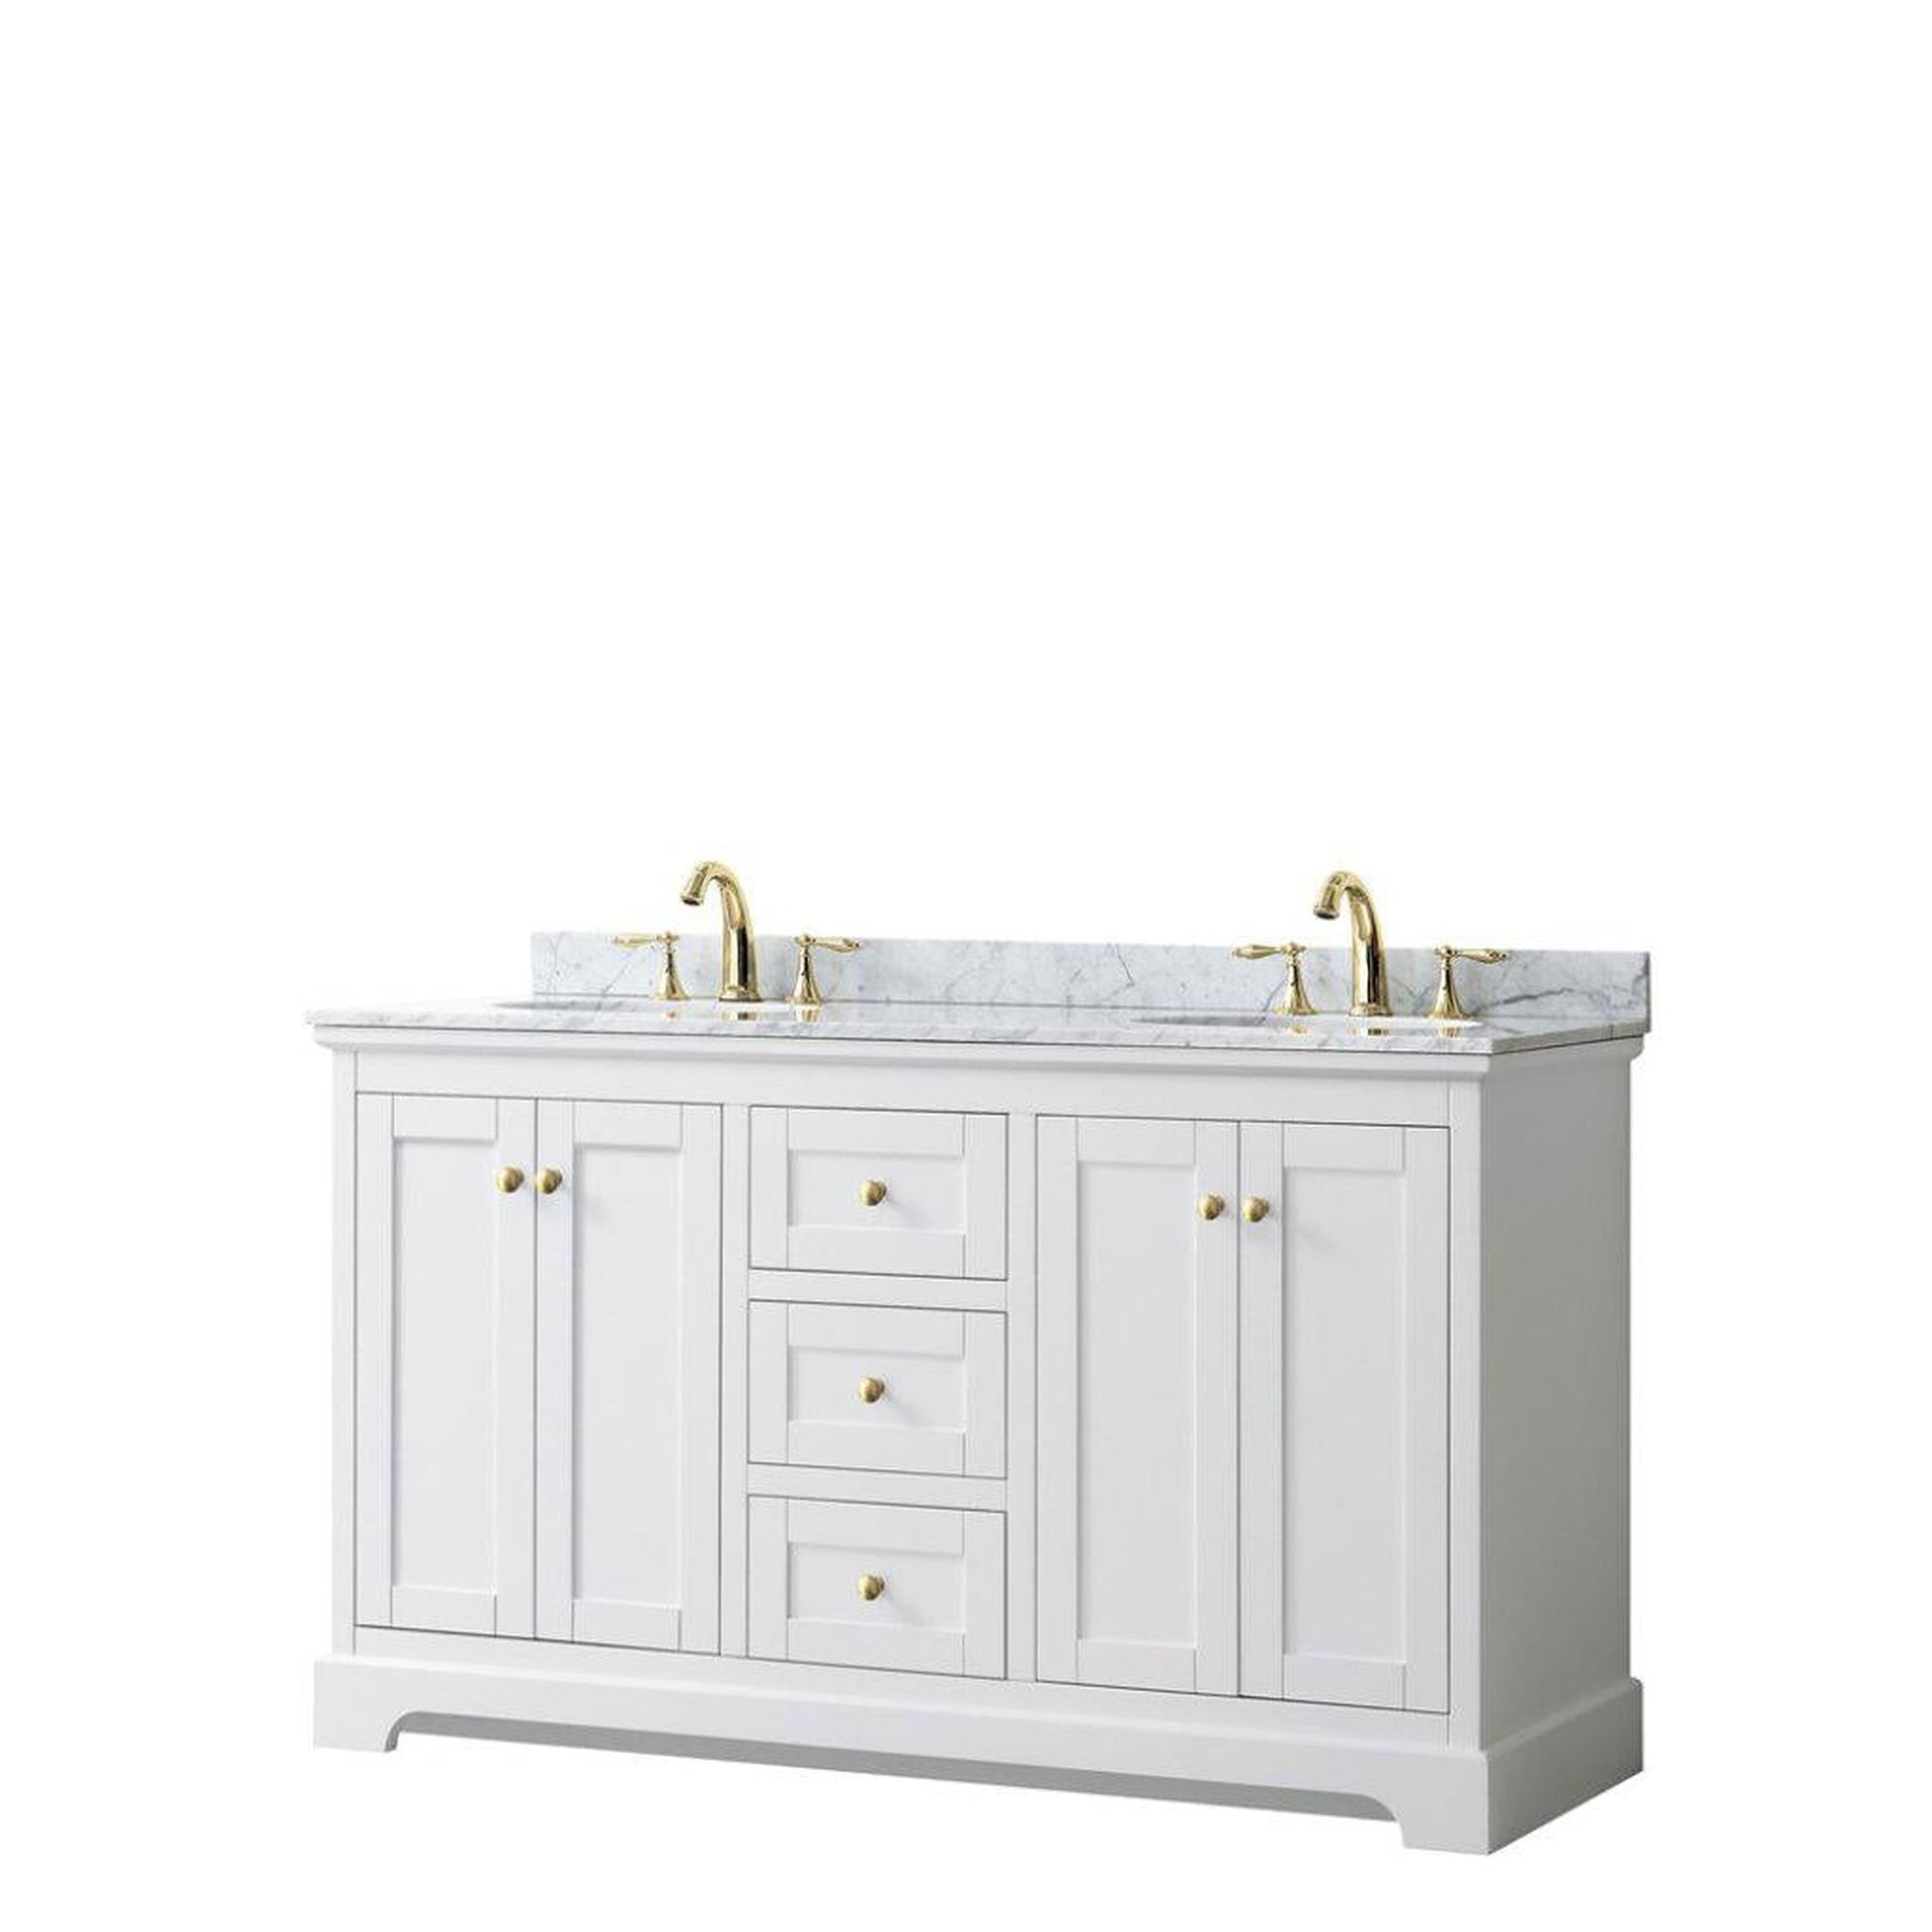 Wyndham Collection Avery 60" White Double Bathroom Vanity, White Carrara Marble Countertop With 3-Hole Faucet, 8" Oval Sink, Gold Trims